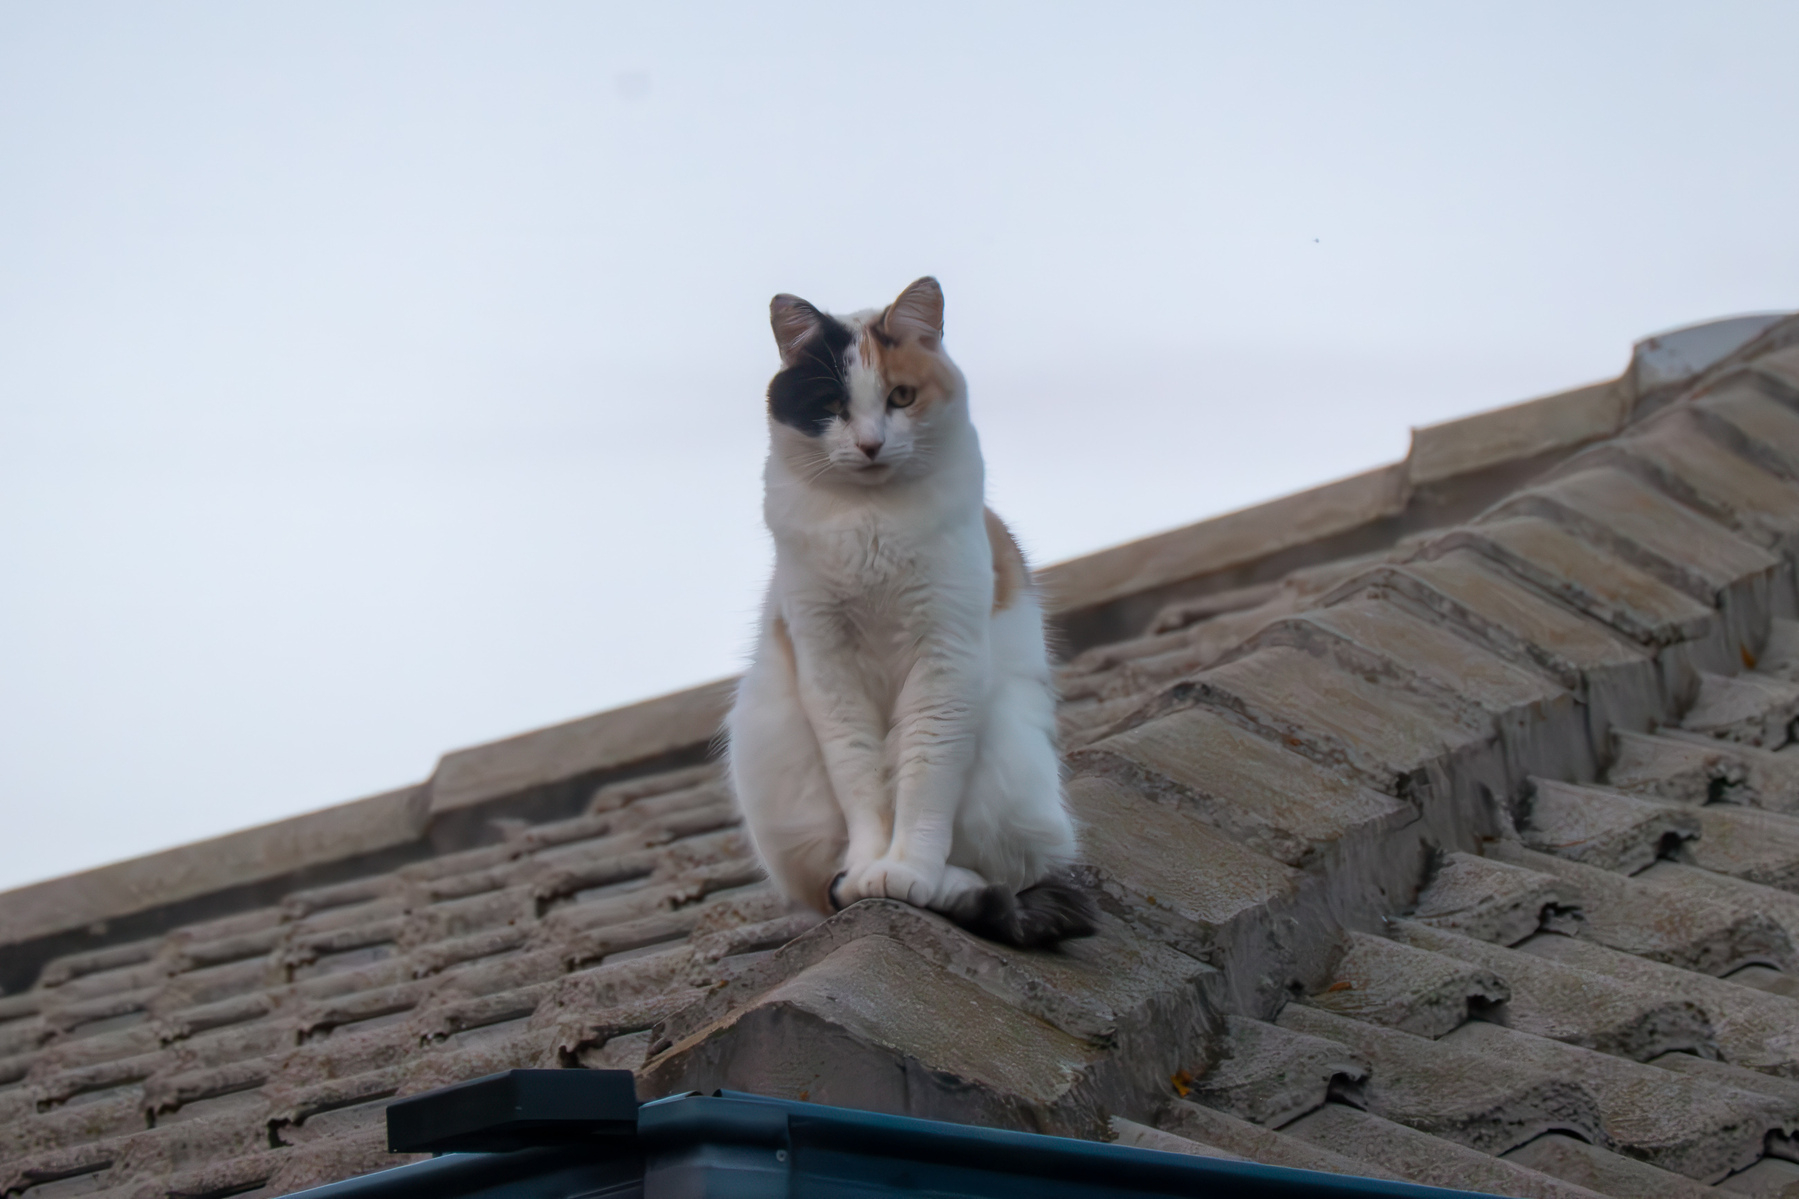 A white cat with black and orange spots sitting on a concrete tile roof of a house.